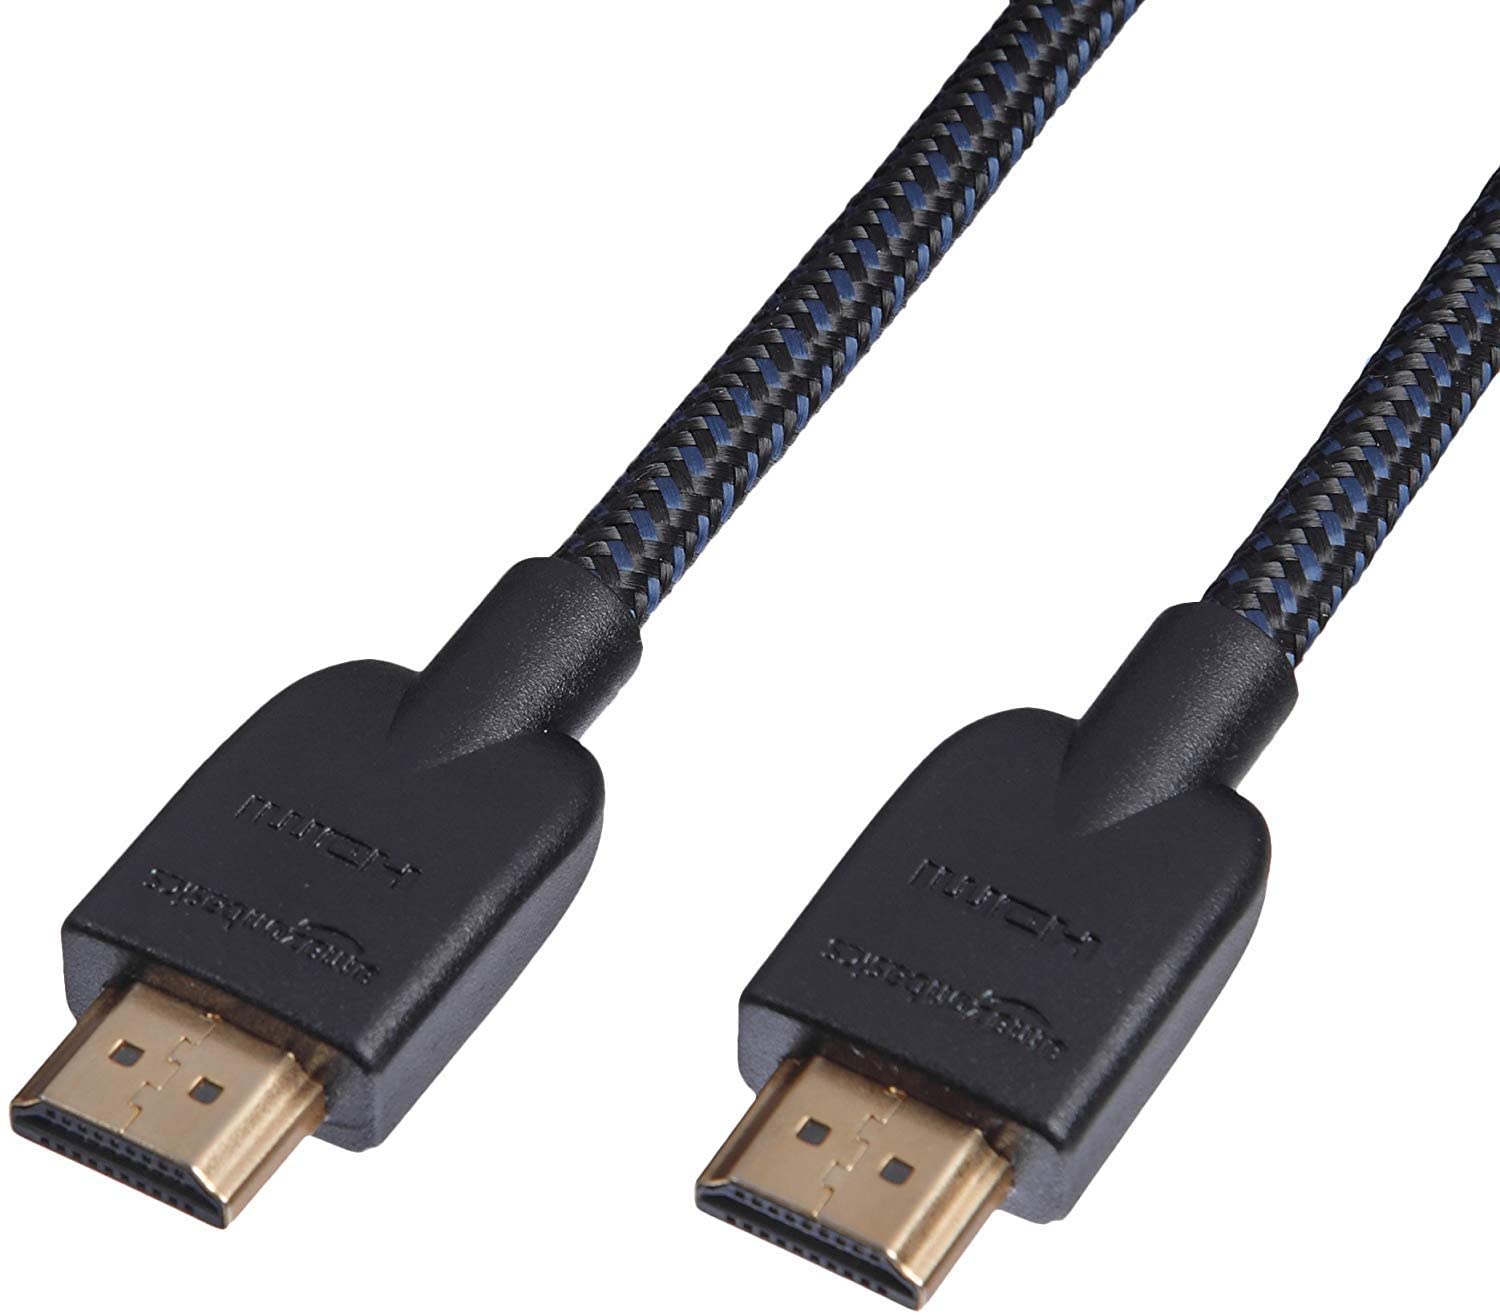 Braided 4k HDMI to HDMI Cable by AmazonBasics